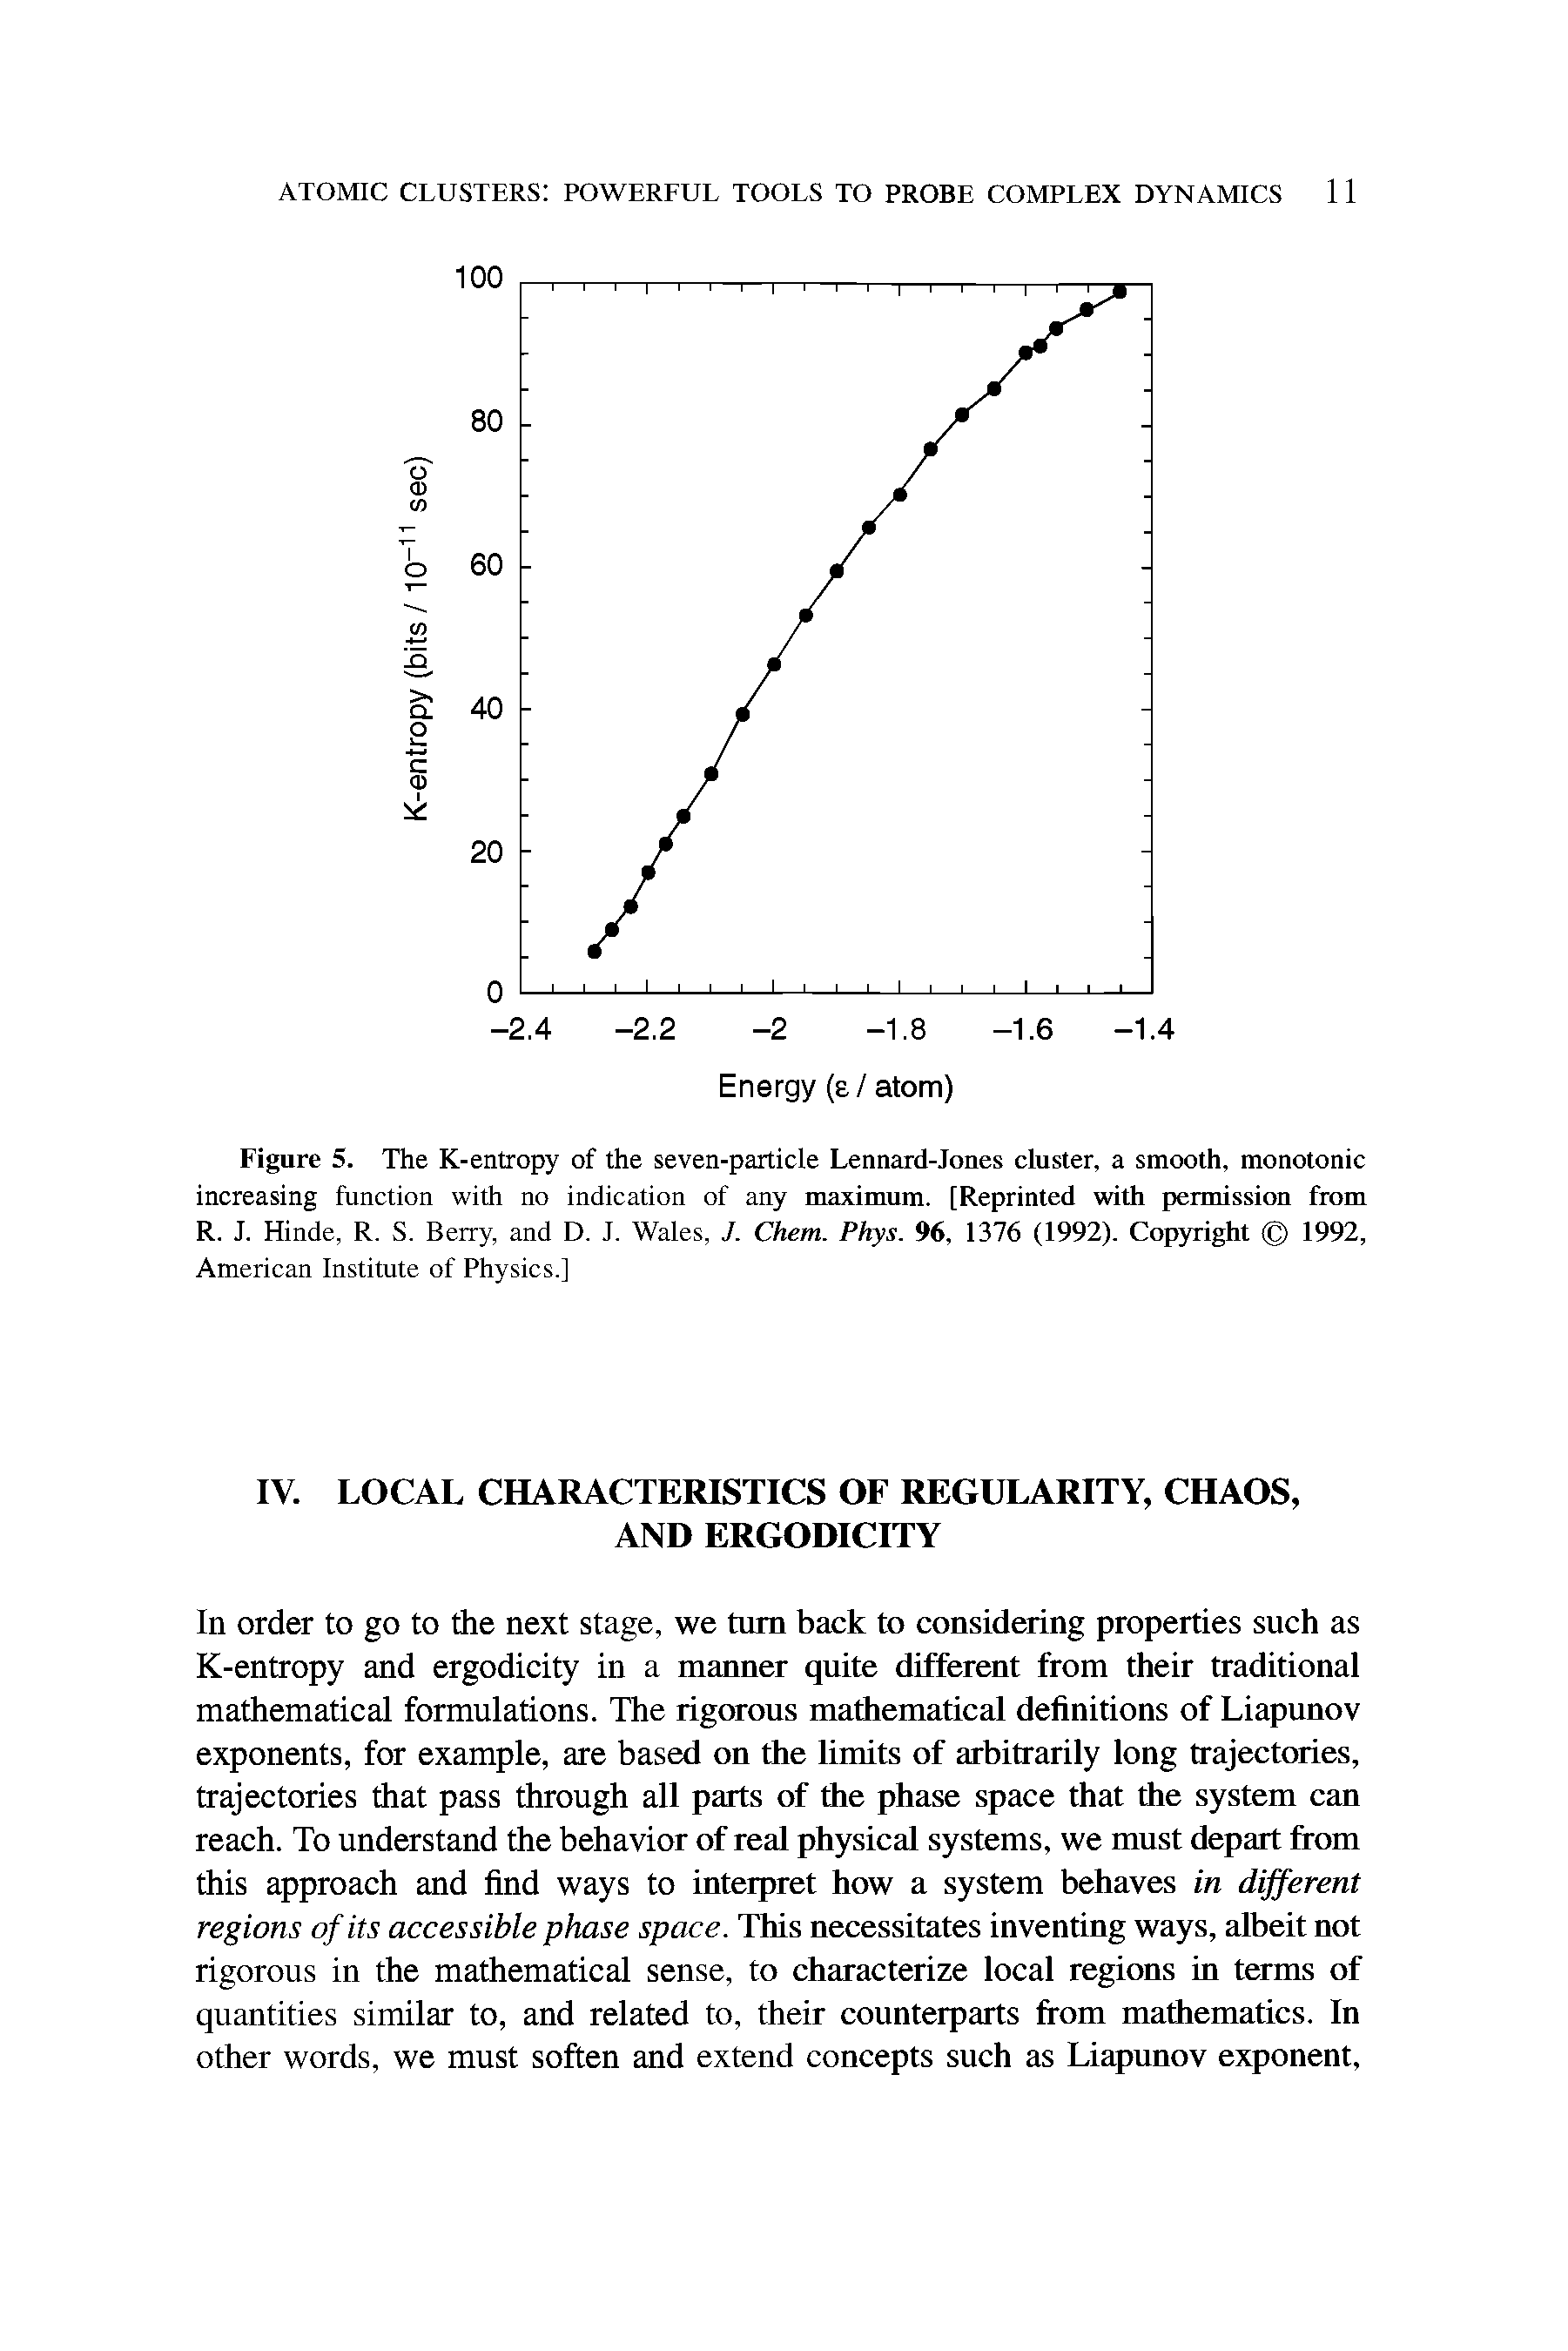 Figure 5. The K-entropy of the seven-particle Lennard-Jones cluster, a smooth, monotonic increasing function with no indication of any maximum. [Reprinted with permission from R. J. Hinde, R. S. Berry, and D. J. Wales, J. Chem. Phys. 96, 1376 (1992). Copyright 1992, American Institute of Physics.]...